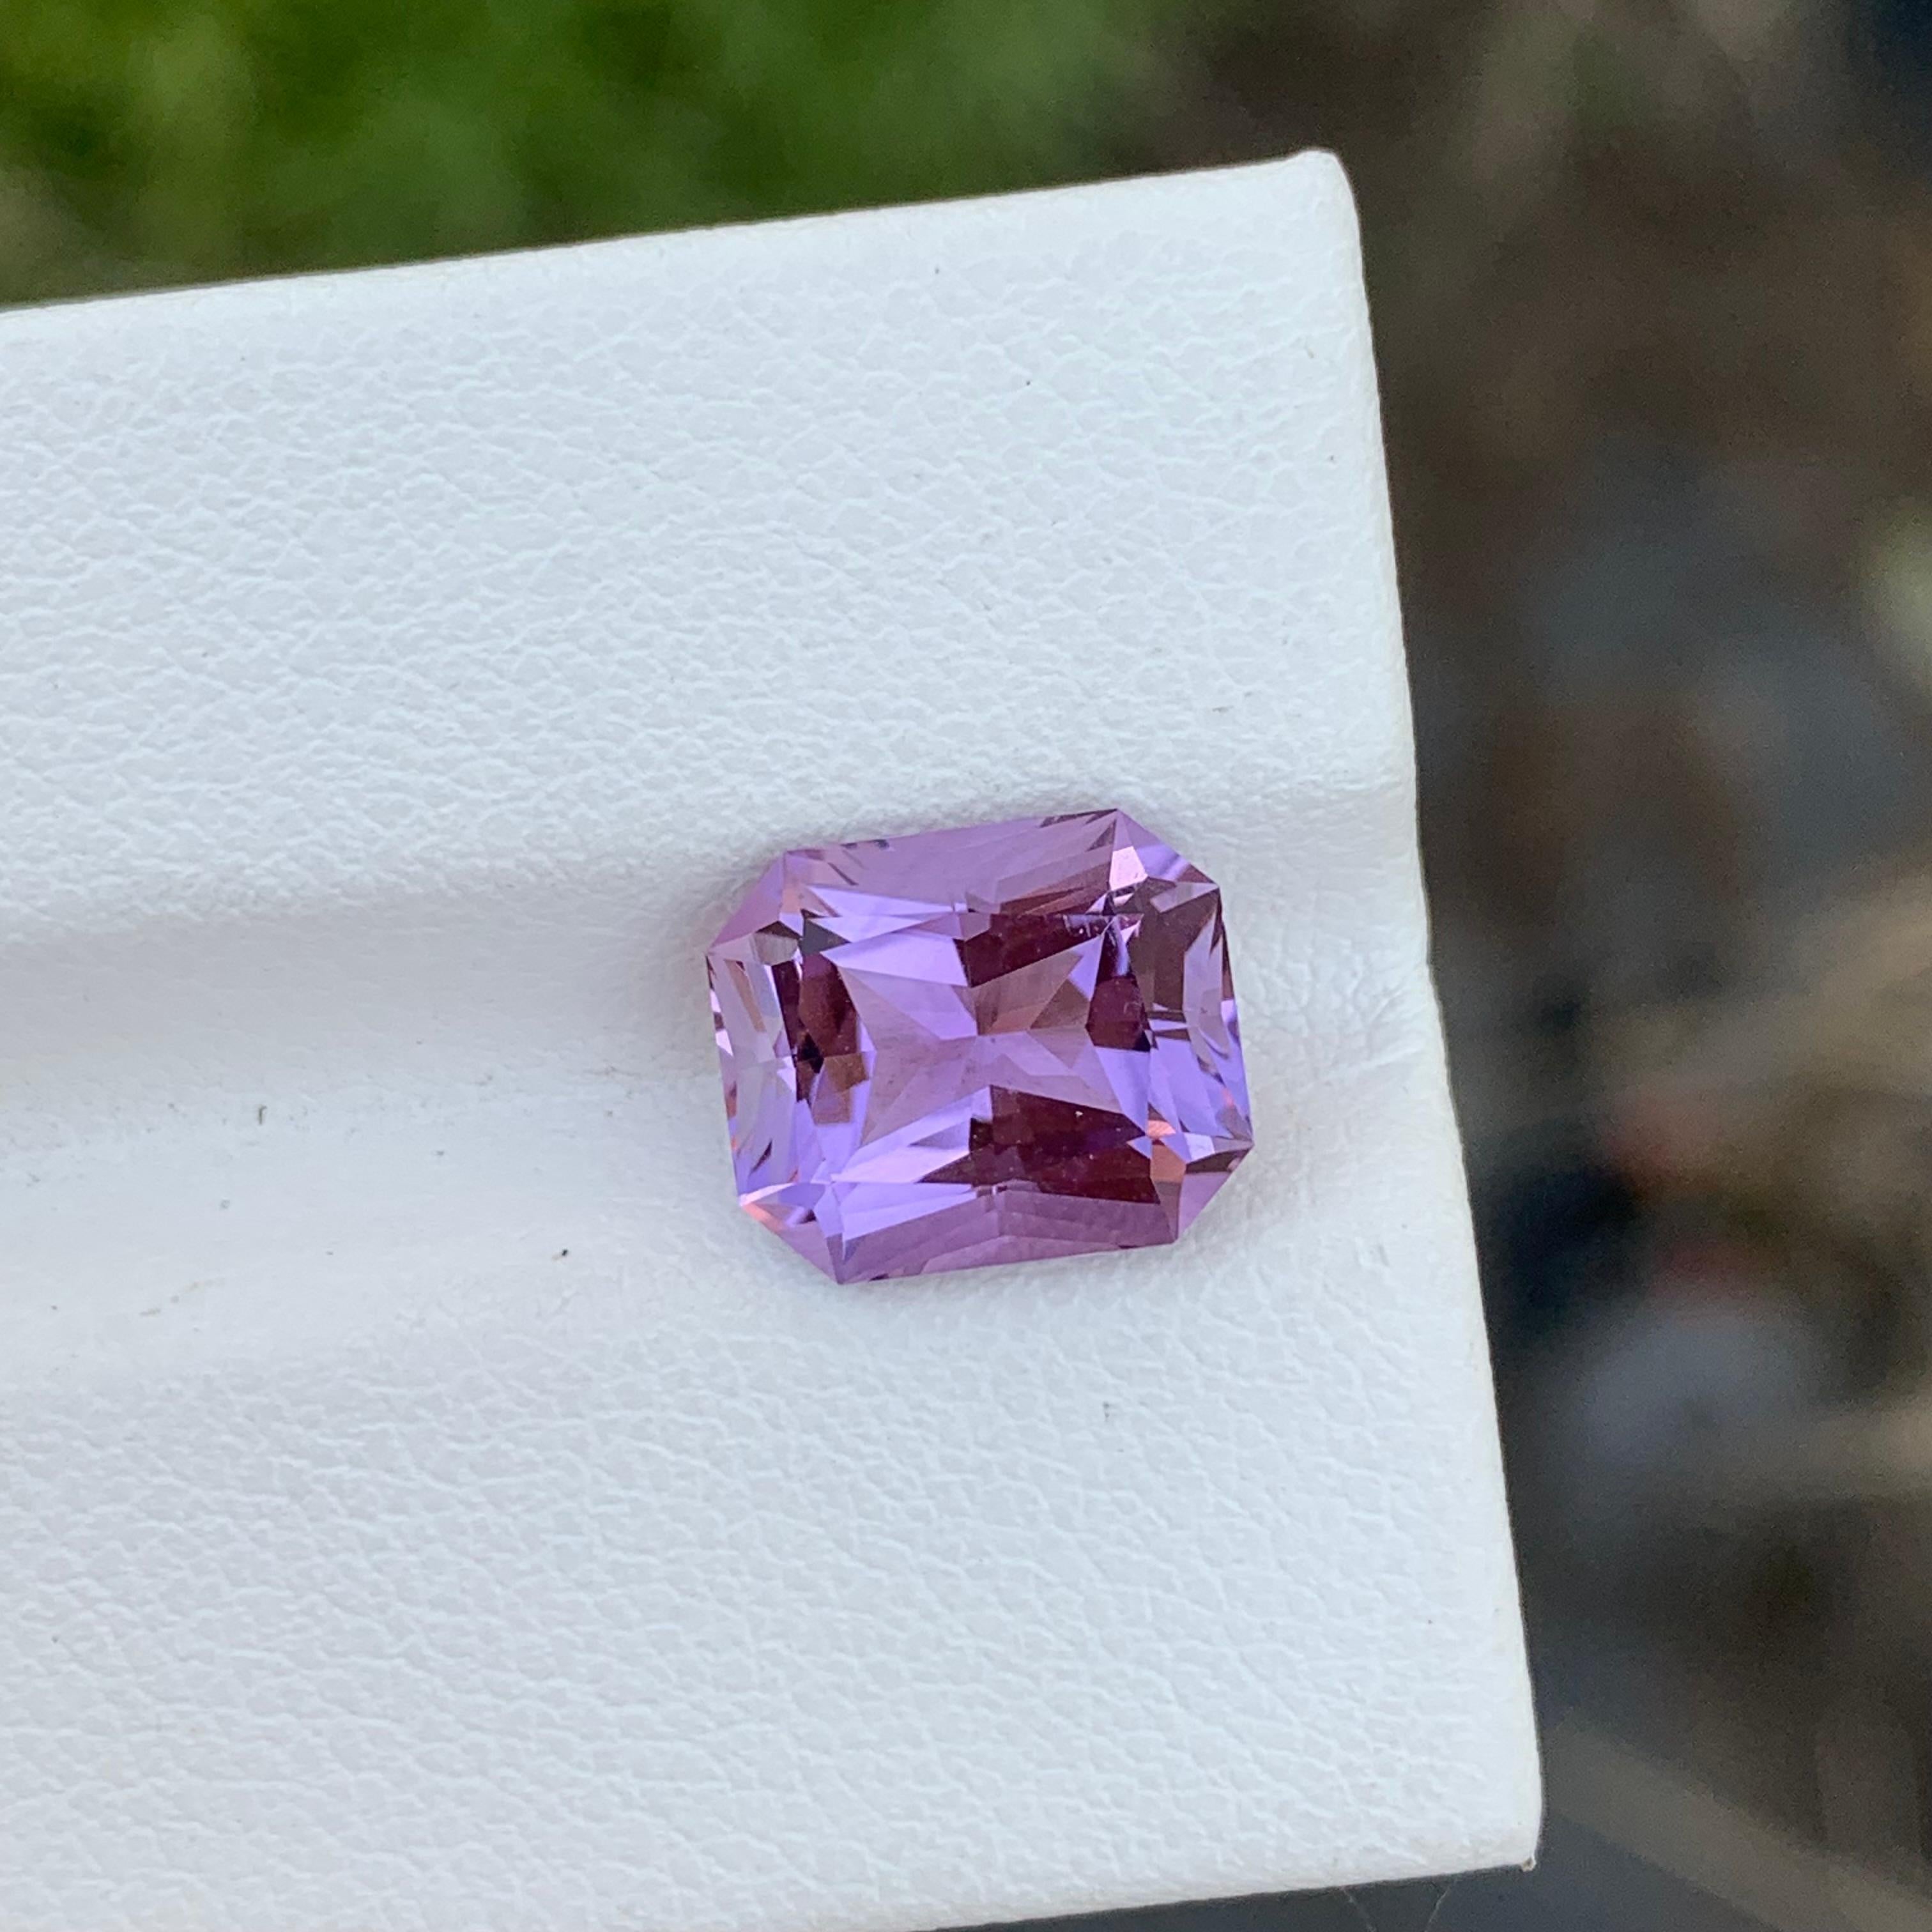 Loose Amethyst
Weight: 3.35 Carats
Dimension: 10.2 x 8.6 x 6.1 Mm
Colour: Purple
Origin: Brazil
Treatment: Non
Certificate: On Demand
Shape: Emerald 

Amethyst, a stunning variety of quartz known for its mesmerizing purple hue, has captivated humans